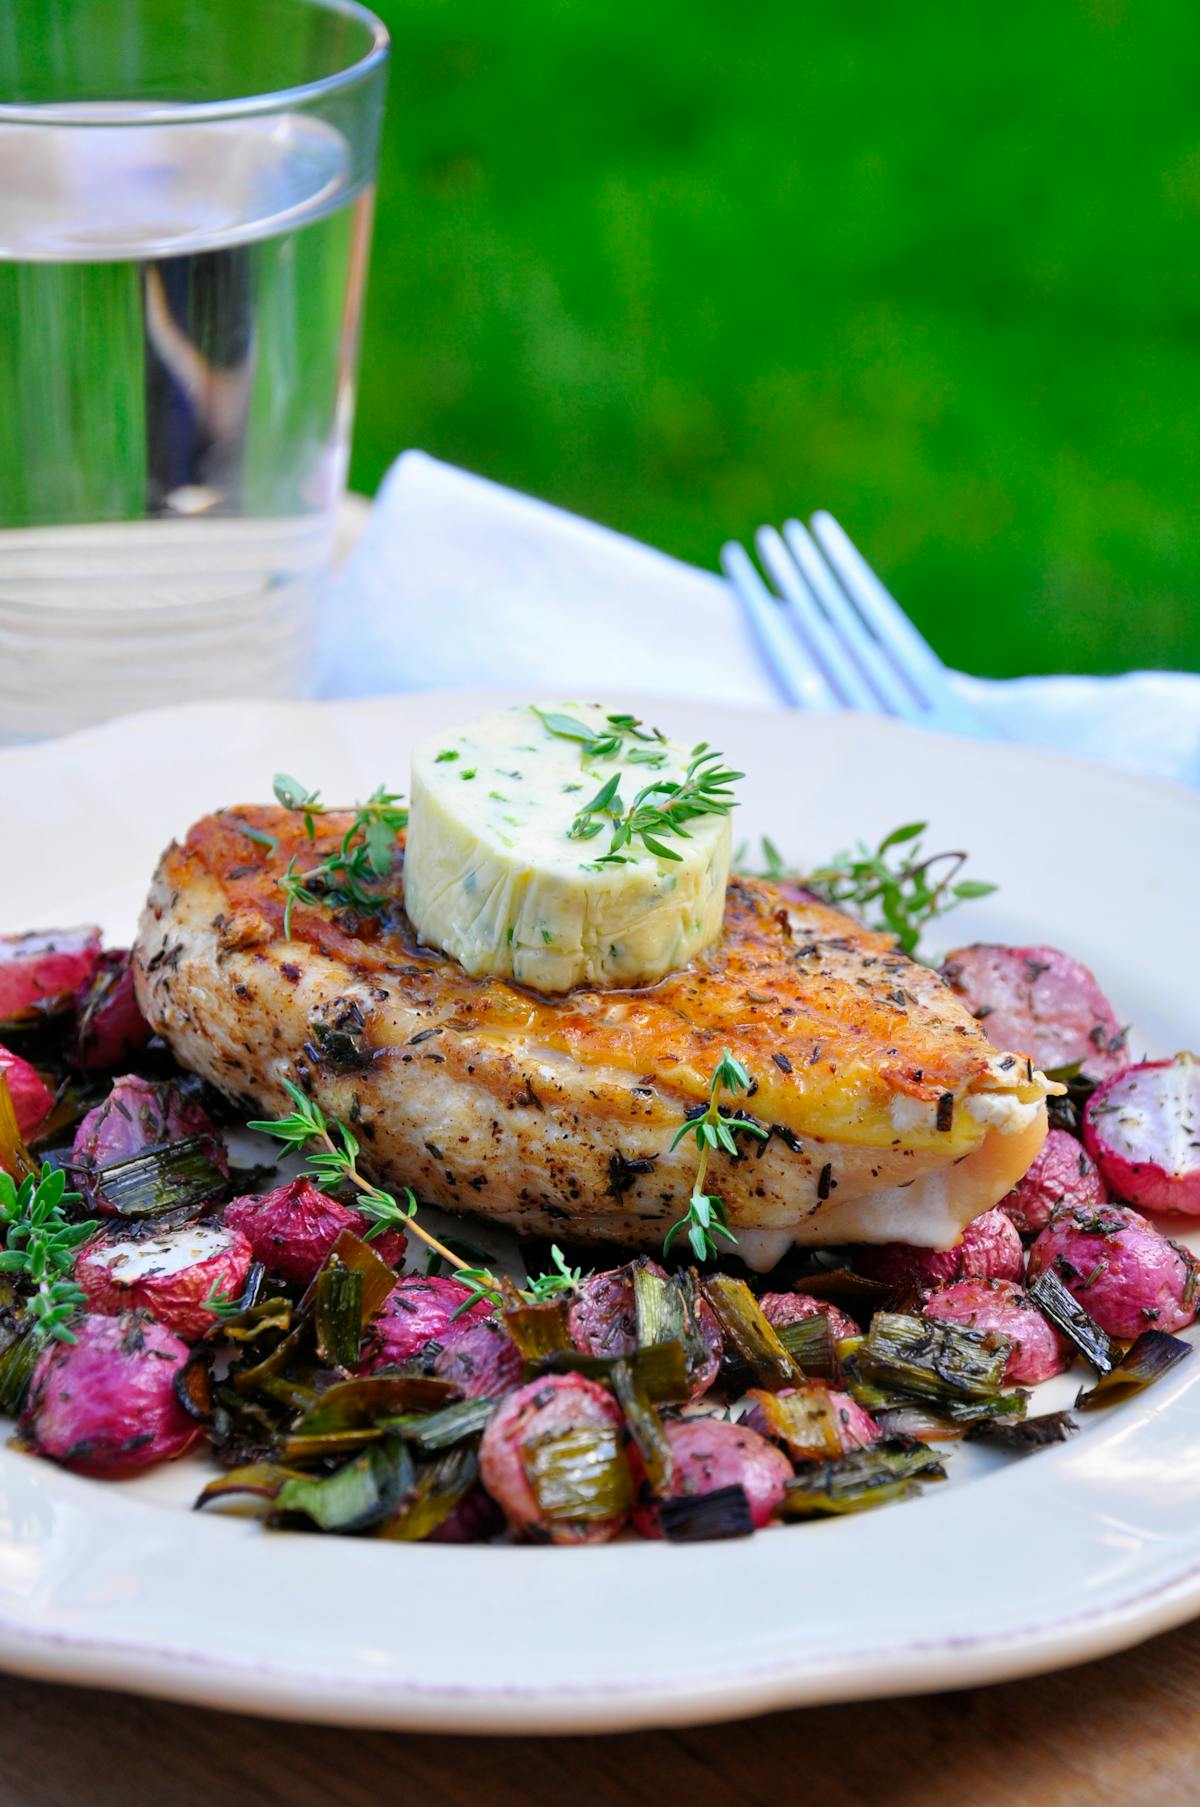 Oven-baked chicken breast and radishes with thyme butter